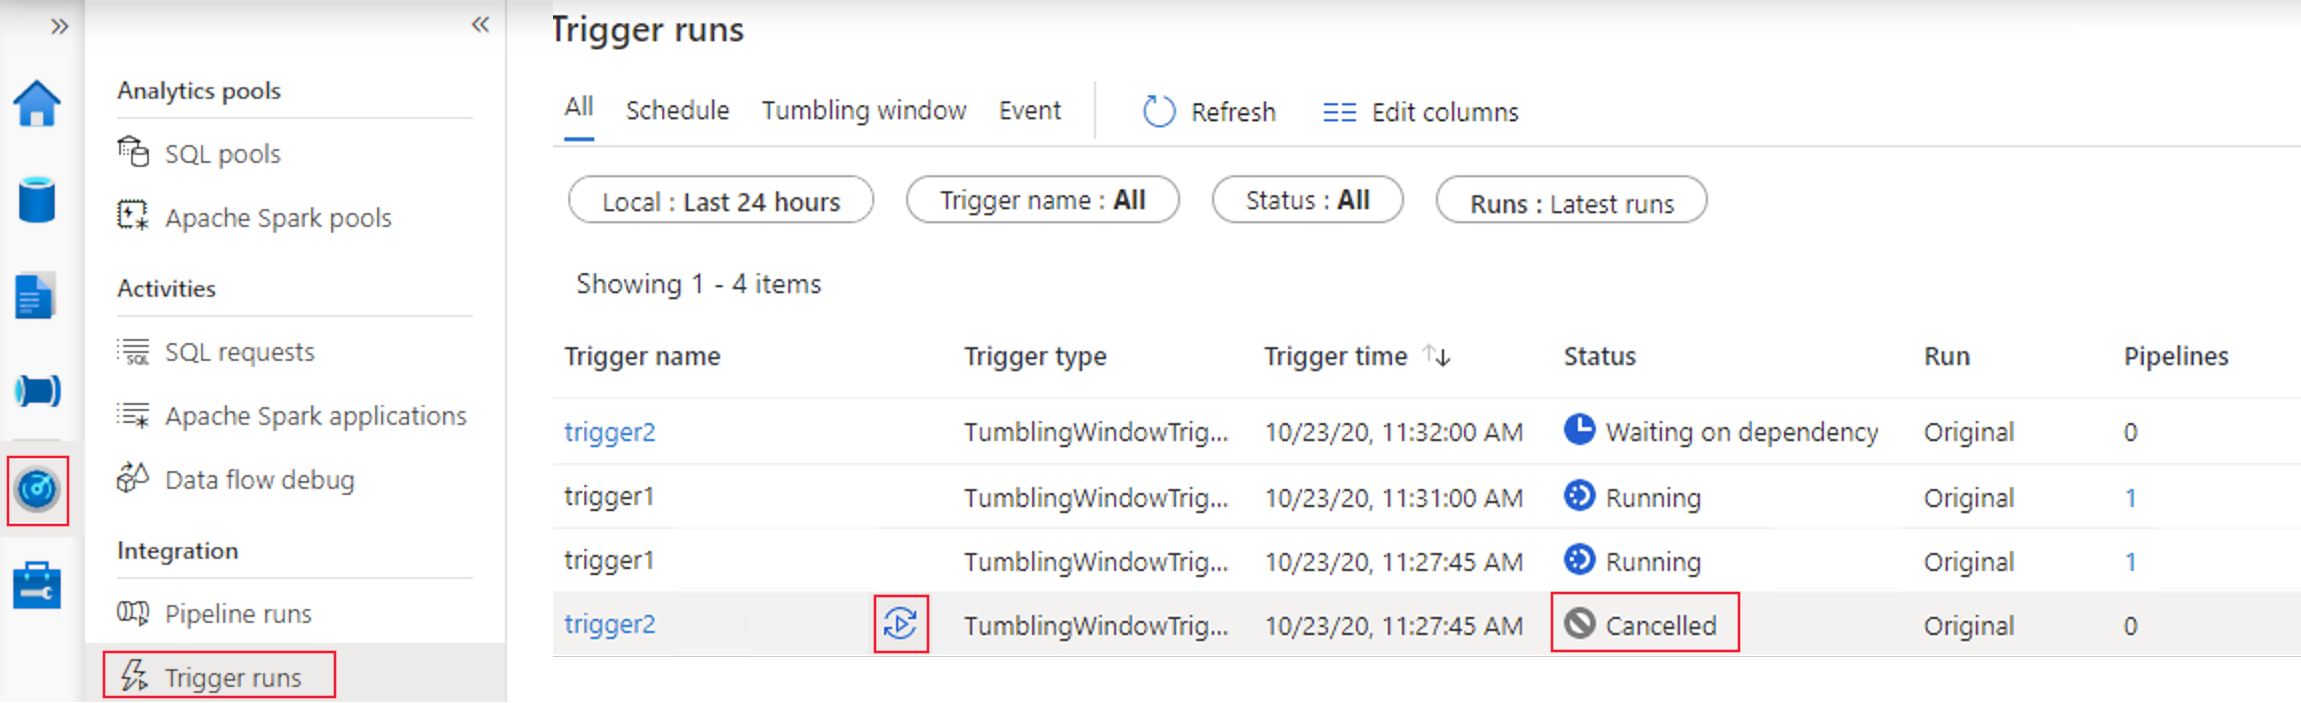 Screenshot that shows rerunning a tumbling window trigger for previously canceled runs in Azure Synapse.